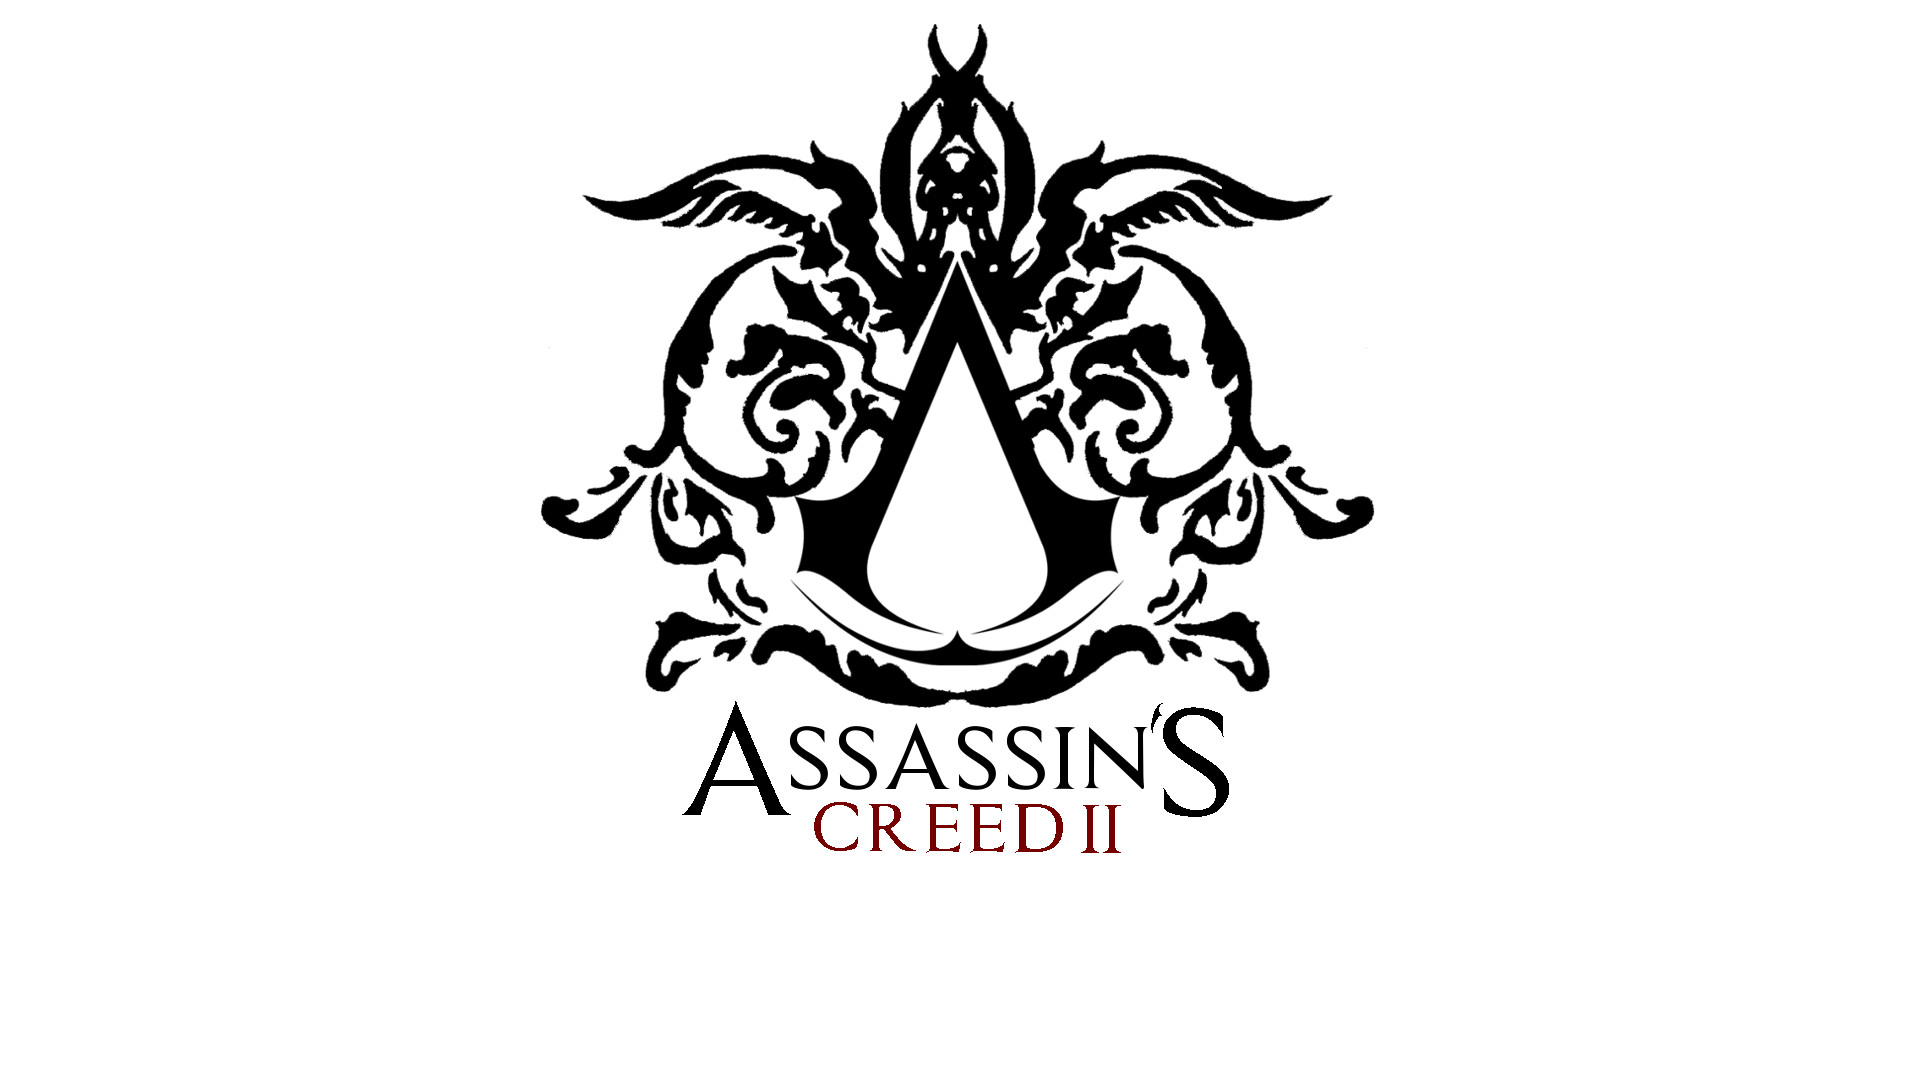 1920x1080 Assassin's Creed 2 Simple Wallpaper by TheJackMoriarty Assassin's Creed 2  Simple Wallpaper by TheJackMoriarty